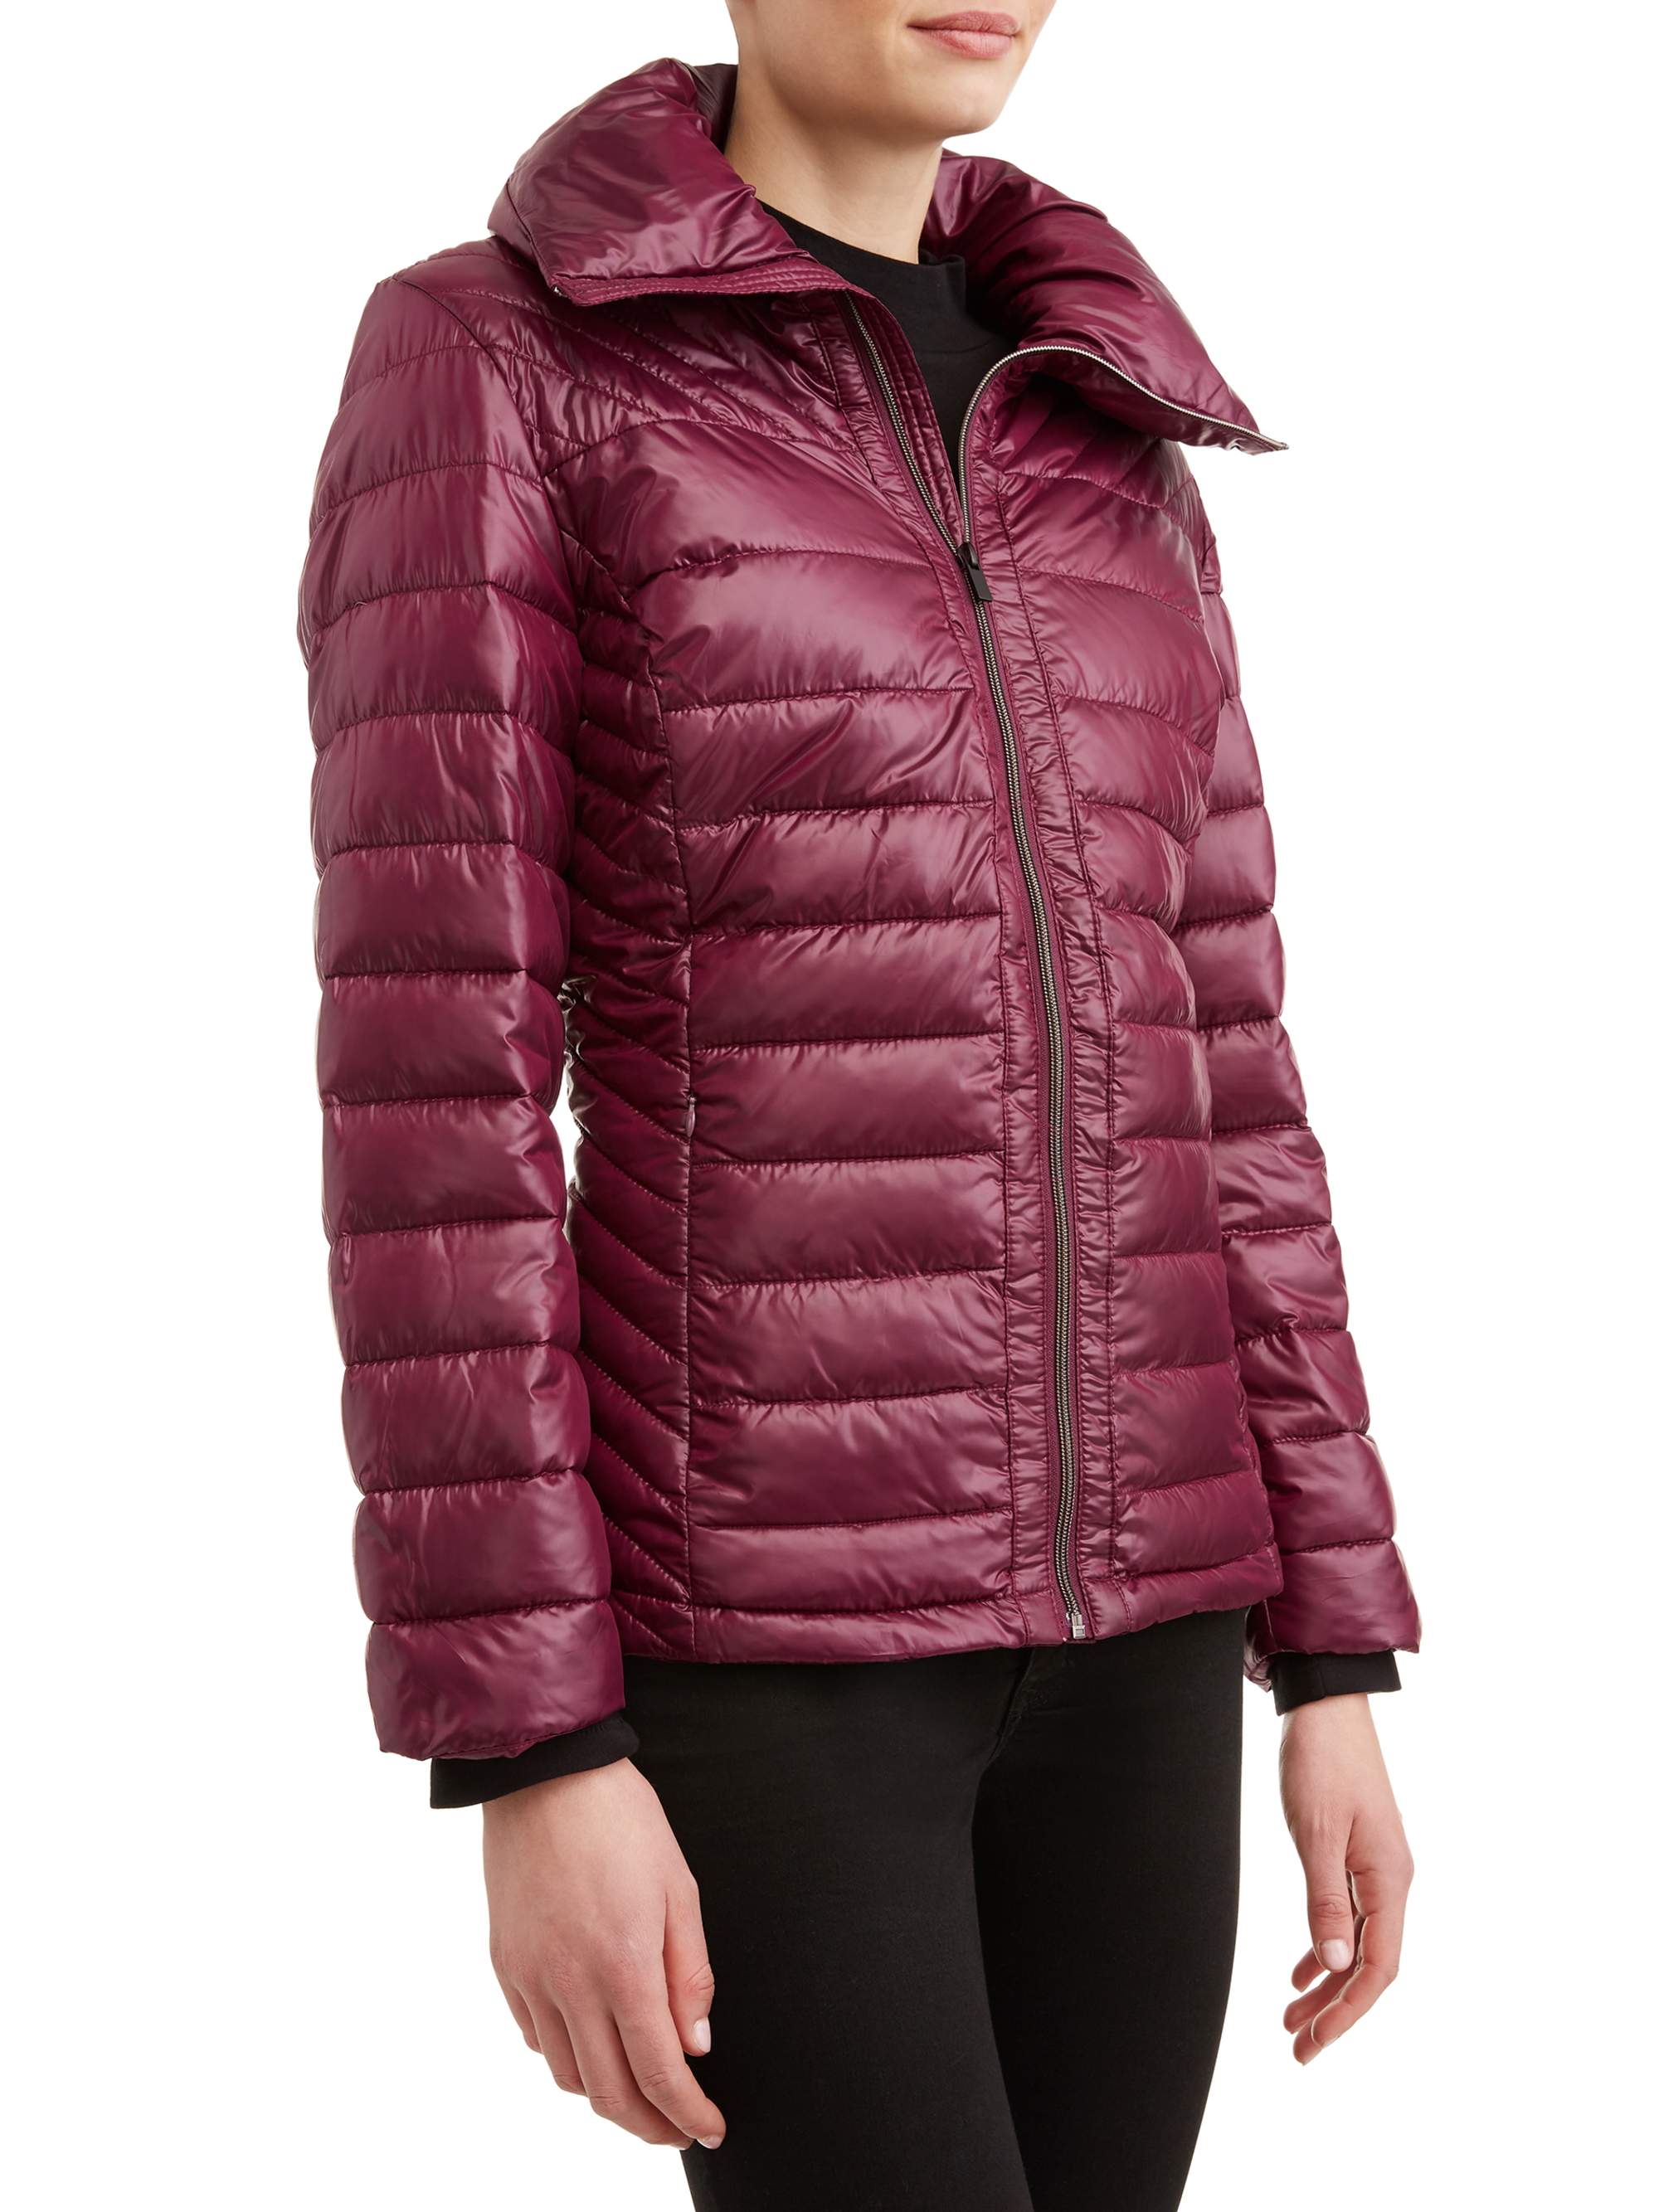 Women's Down Blend Quilted Jacket with Convertible Collar - image 1 of 5